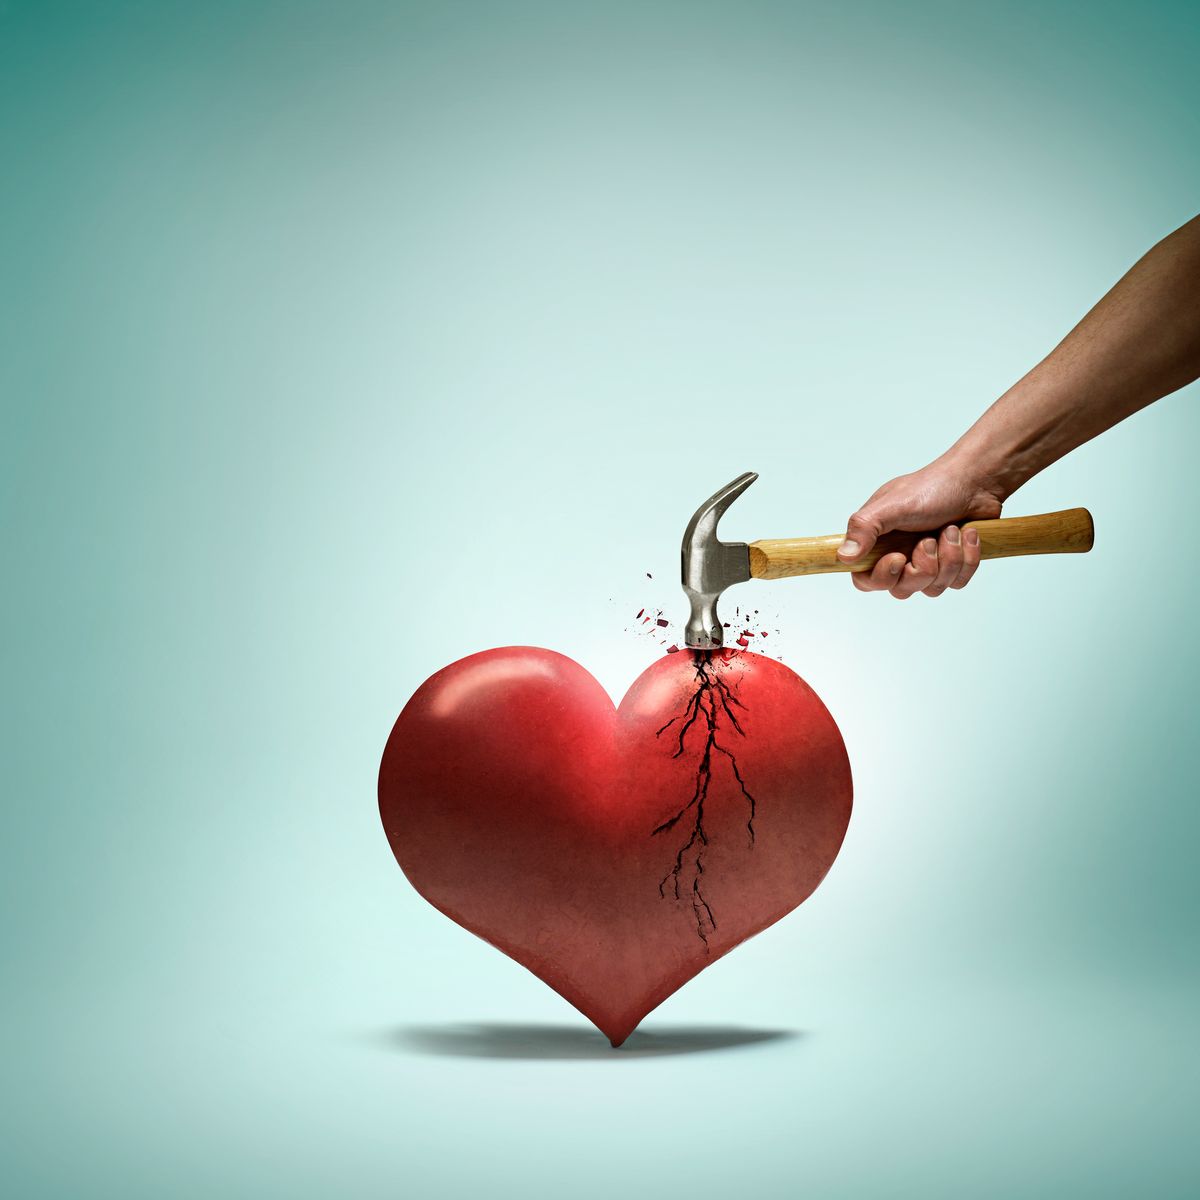 How to Heal a Broken Heart, According to Therapists